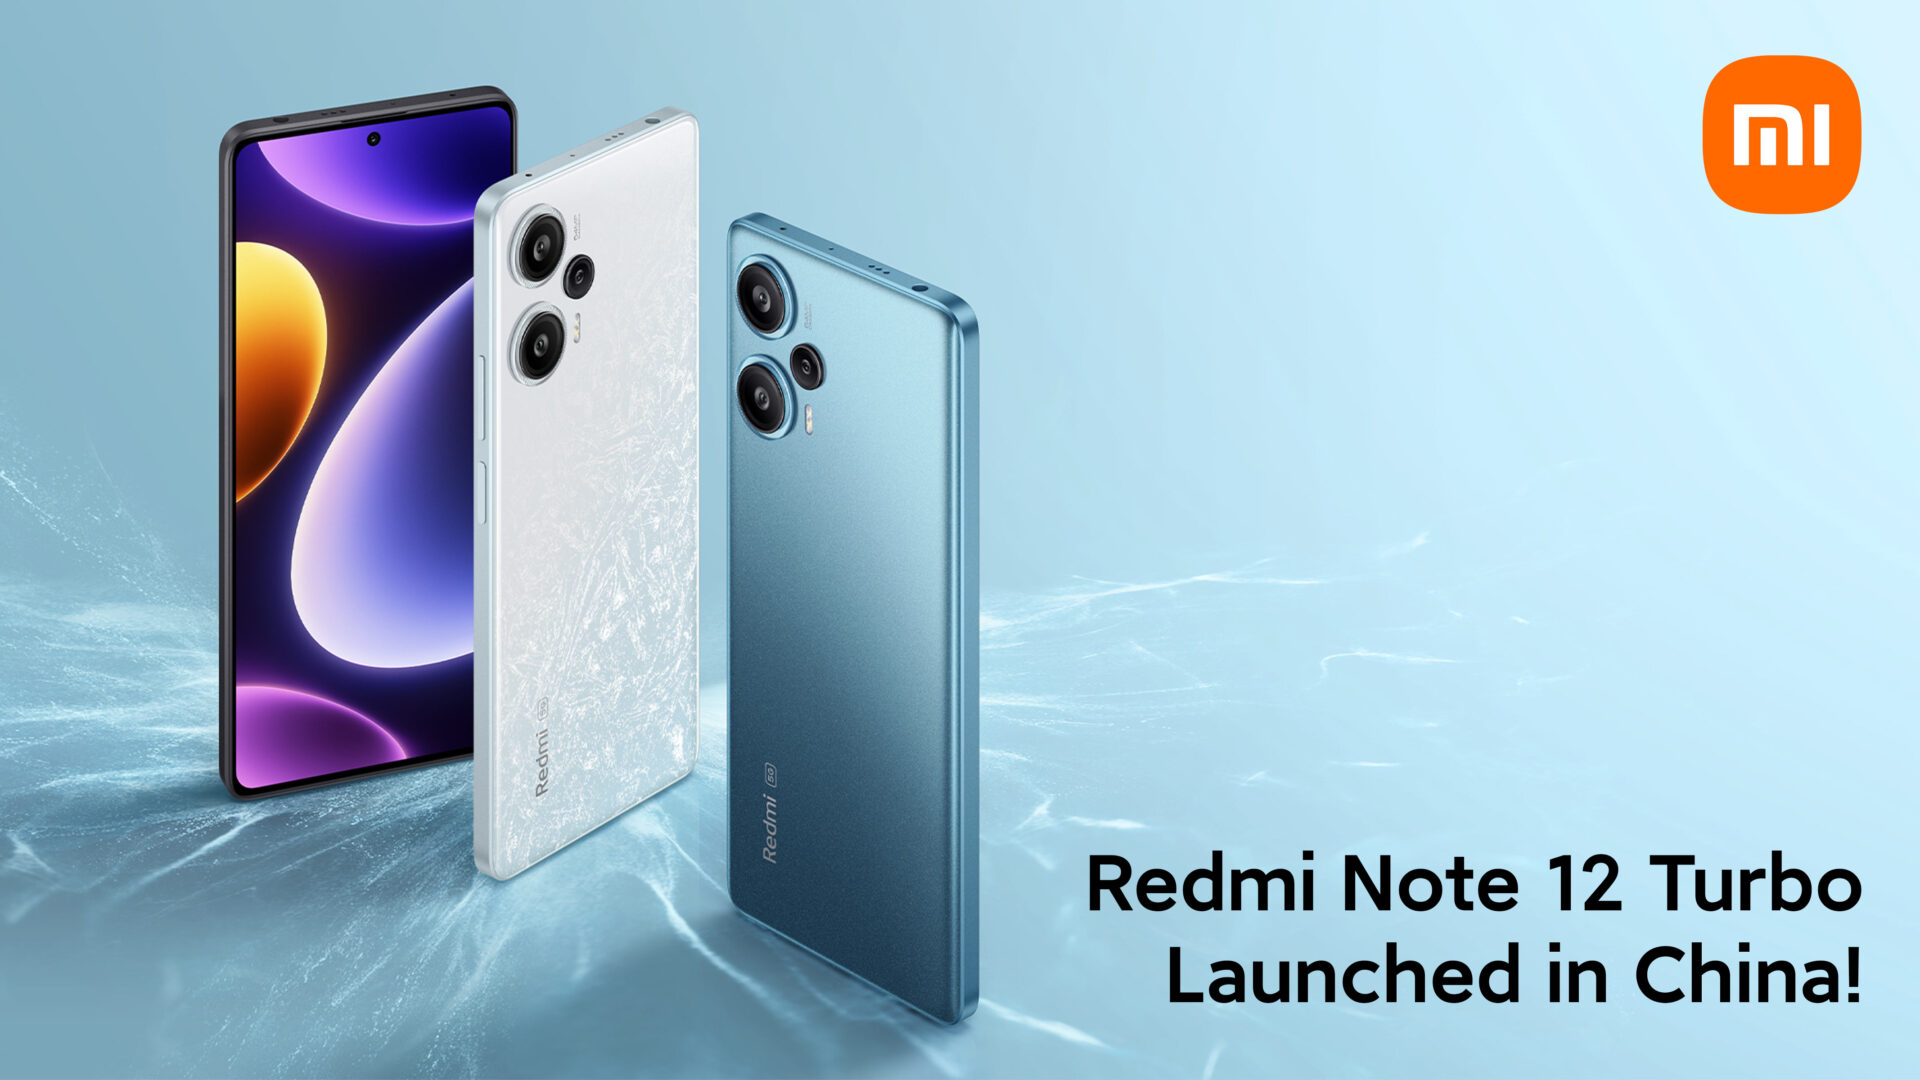 Redmi Note 12 Turbo Launched in China: Specifications, Price and More! -  xiaomiui